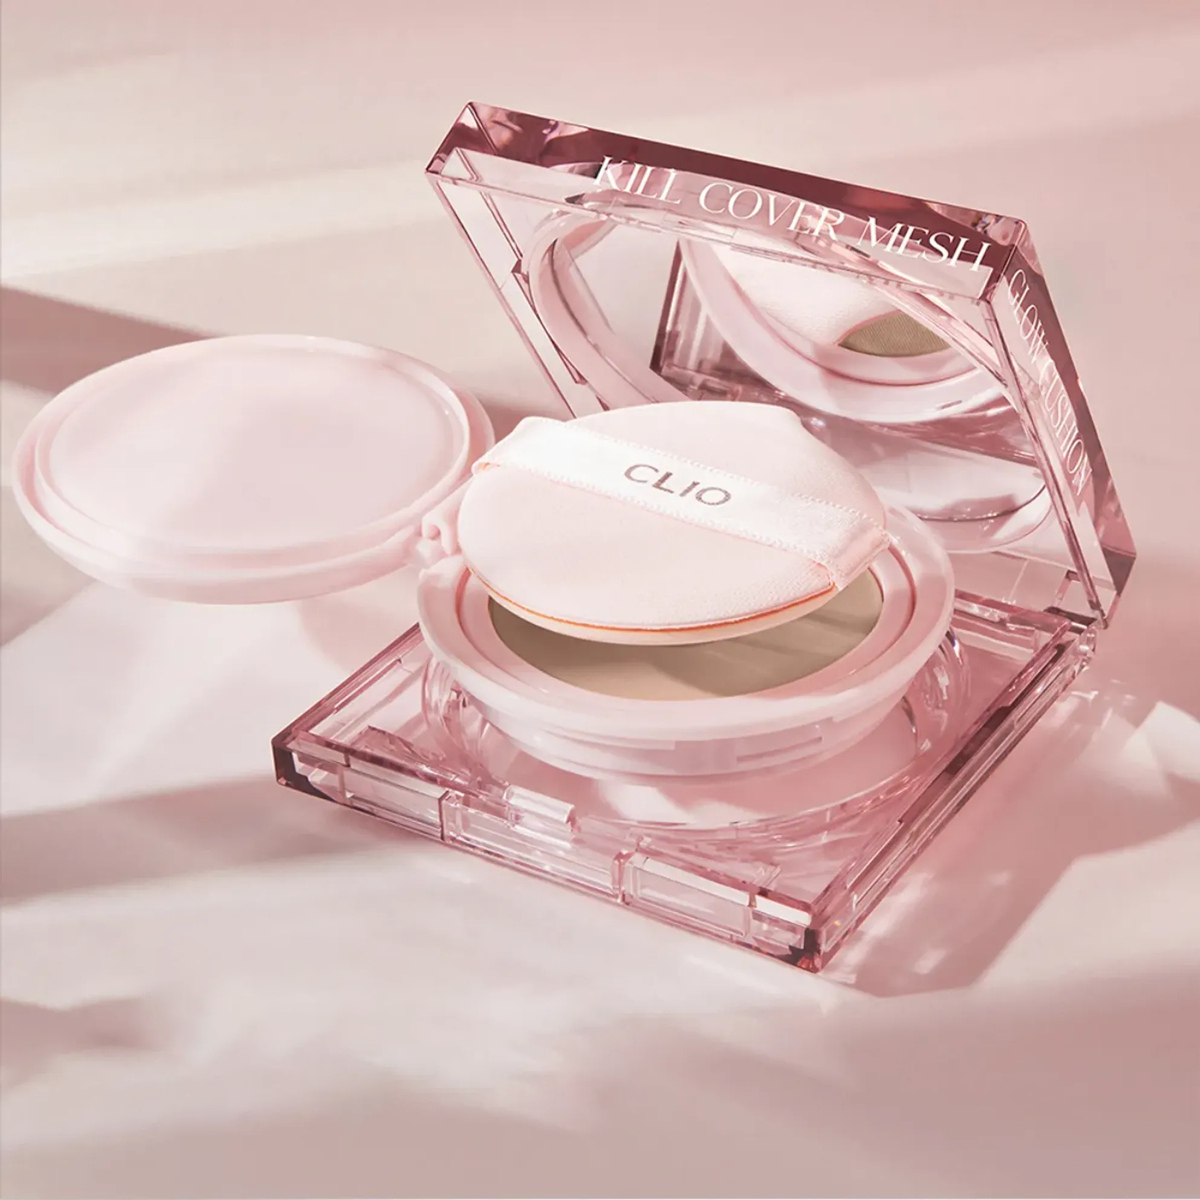 CLIO - Kill Cover Mesh Glow Cushion Set - Korean Makeup Coverage -  Smooth Radiance  Foundation Flawless